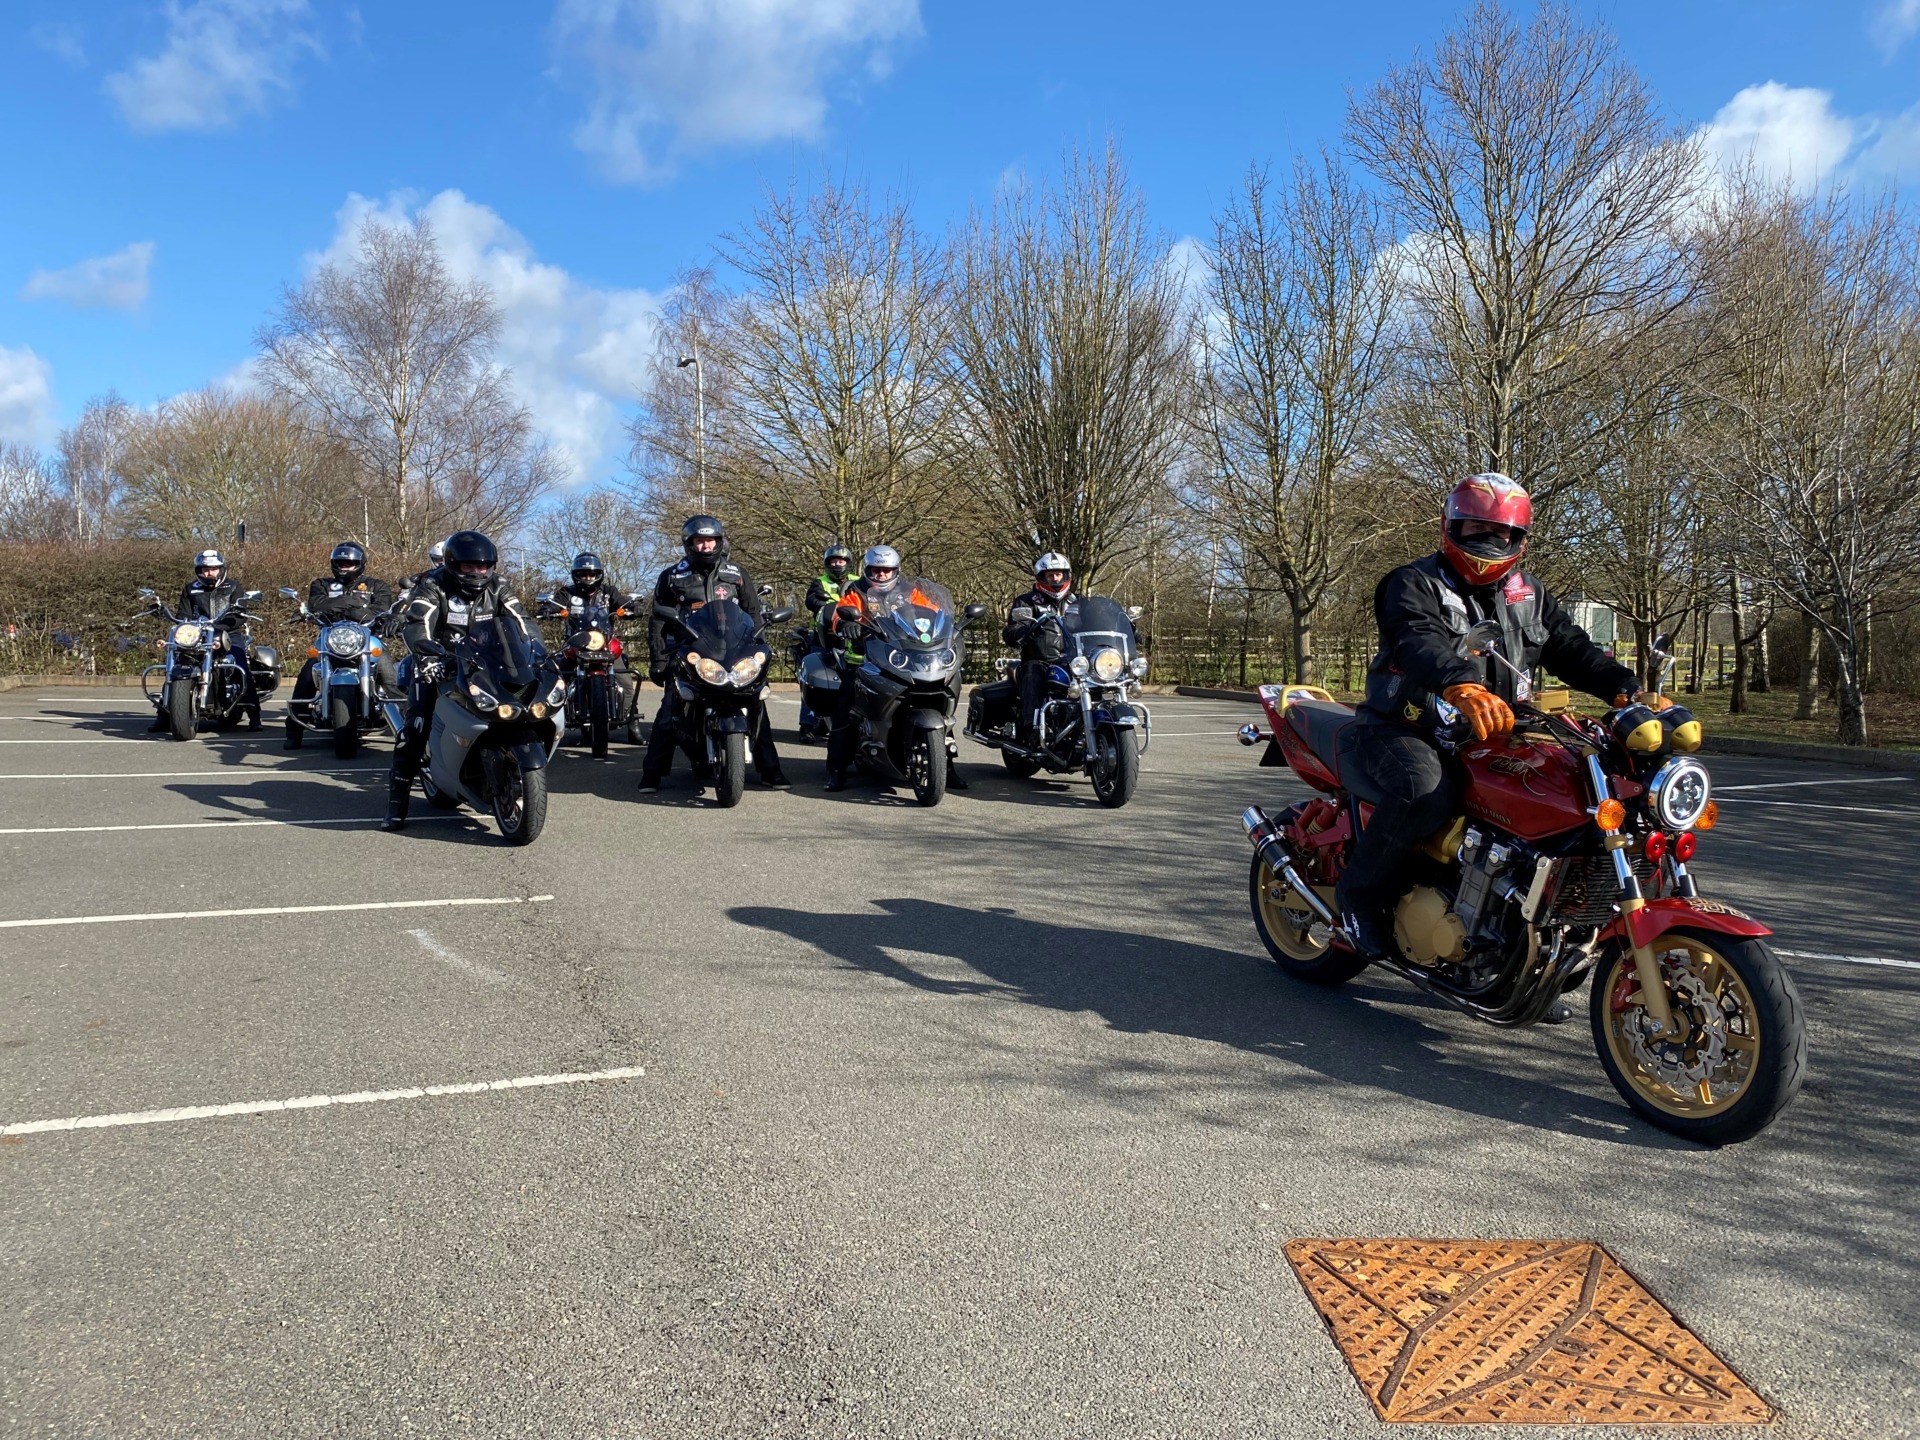 A group of bikers sit on their motorbikes in the car park of St Richard's Hospice. It is a bright and sunny day, with blue skies and white clouds.